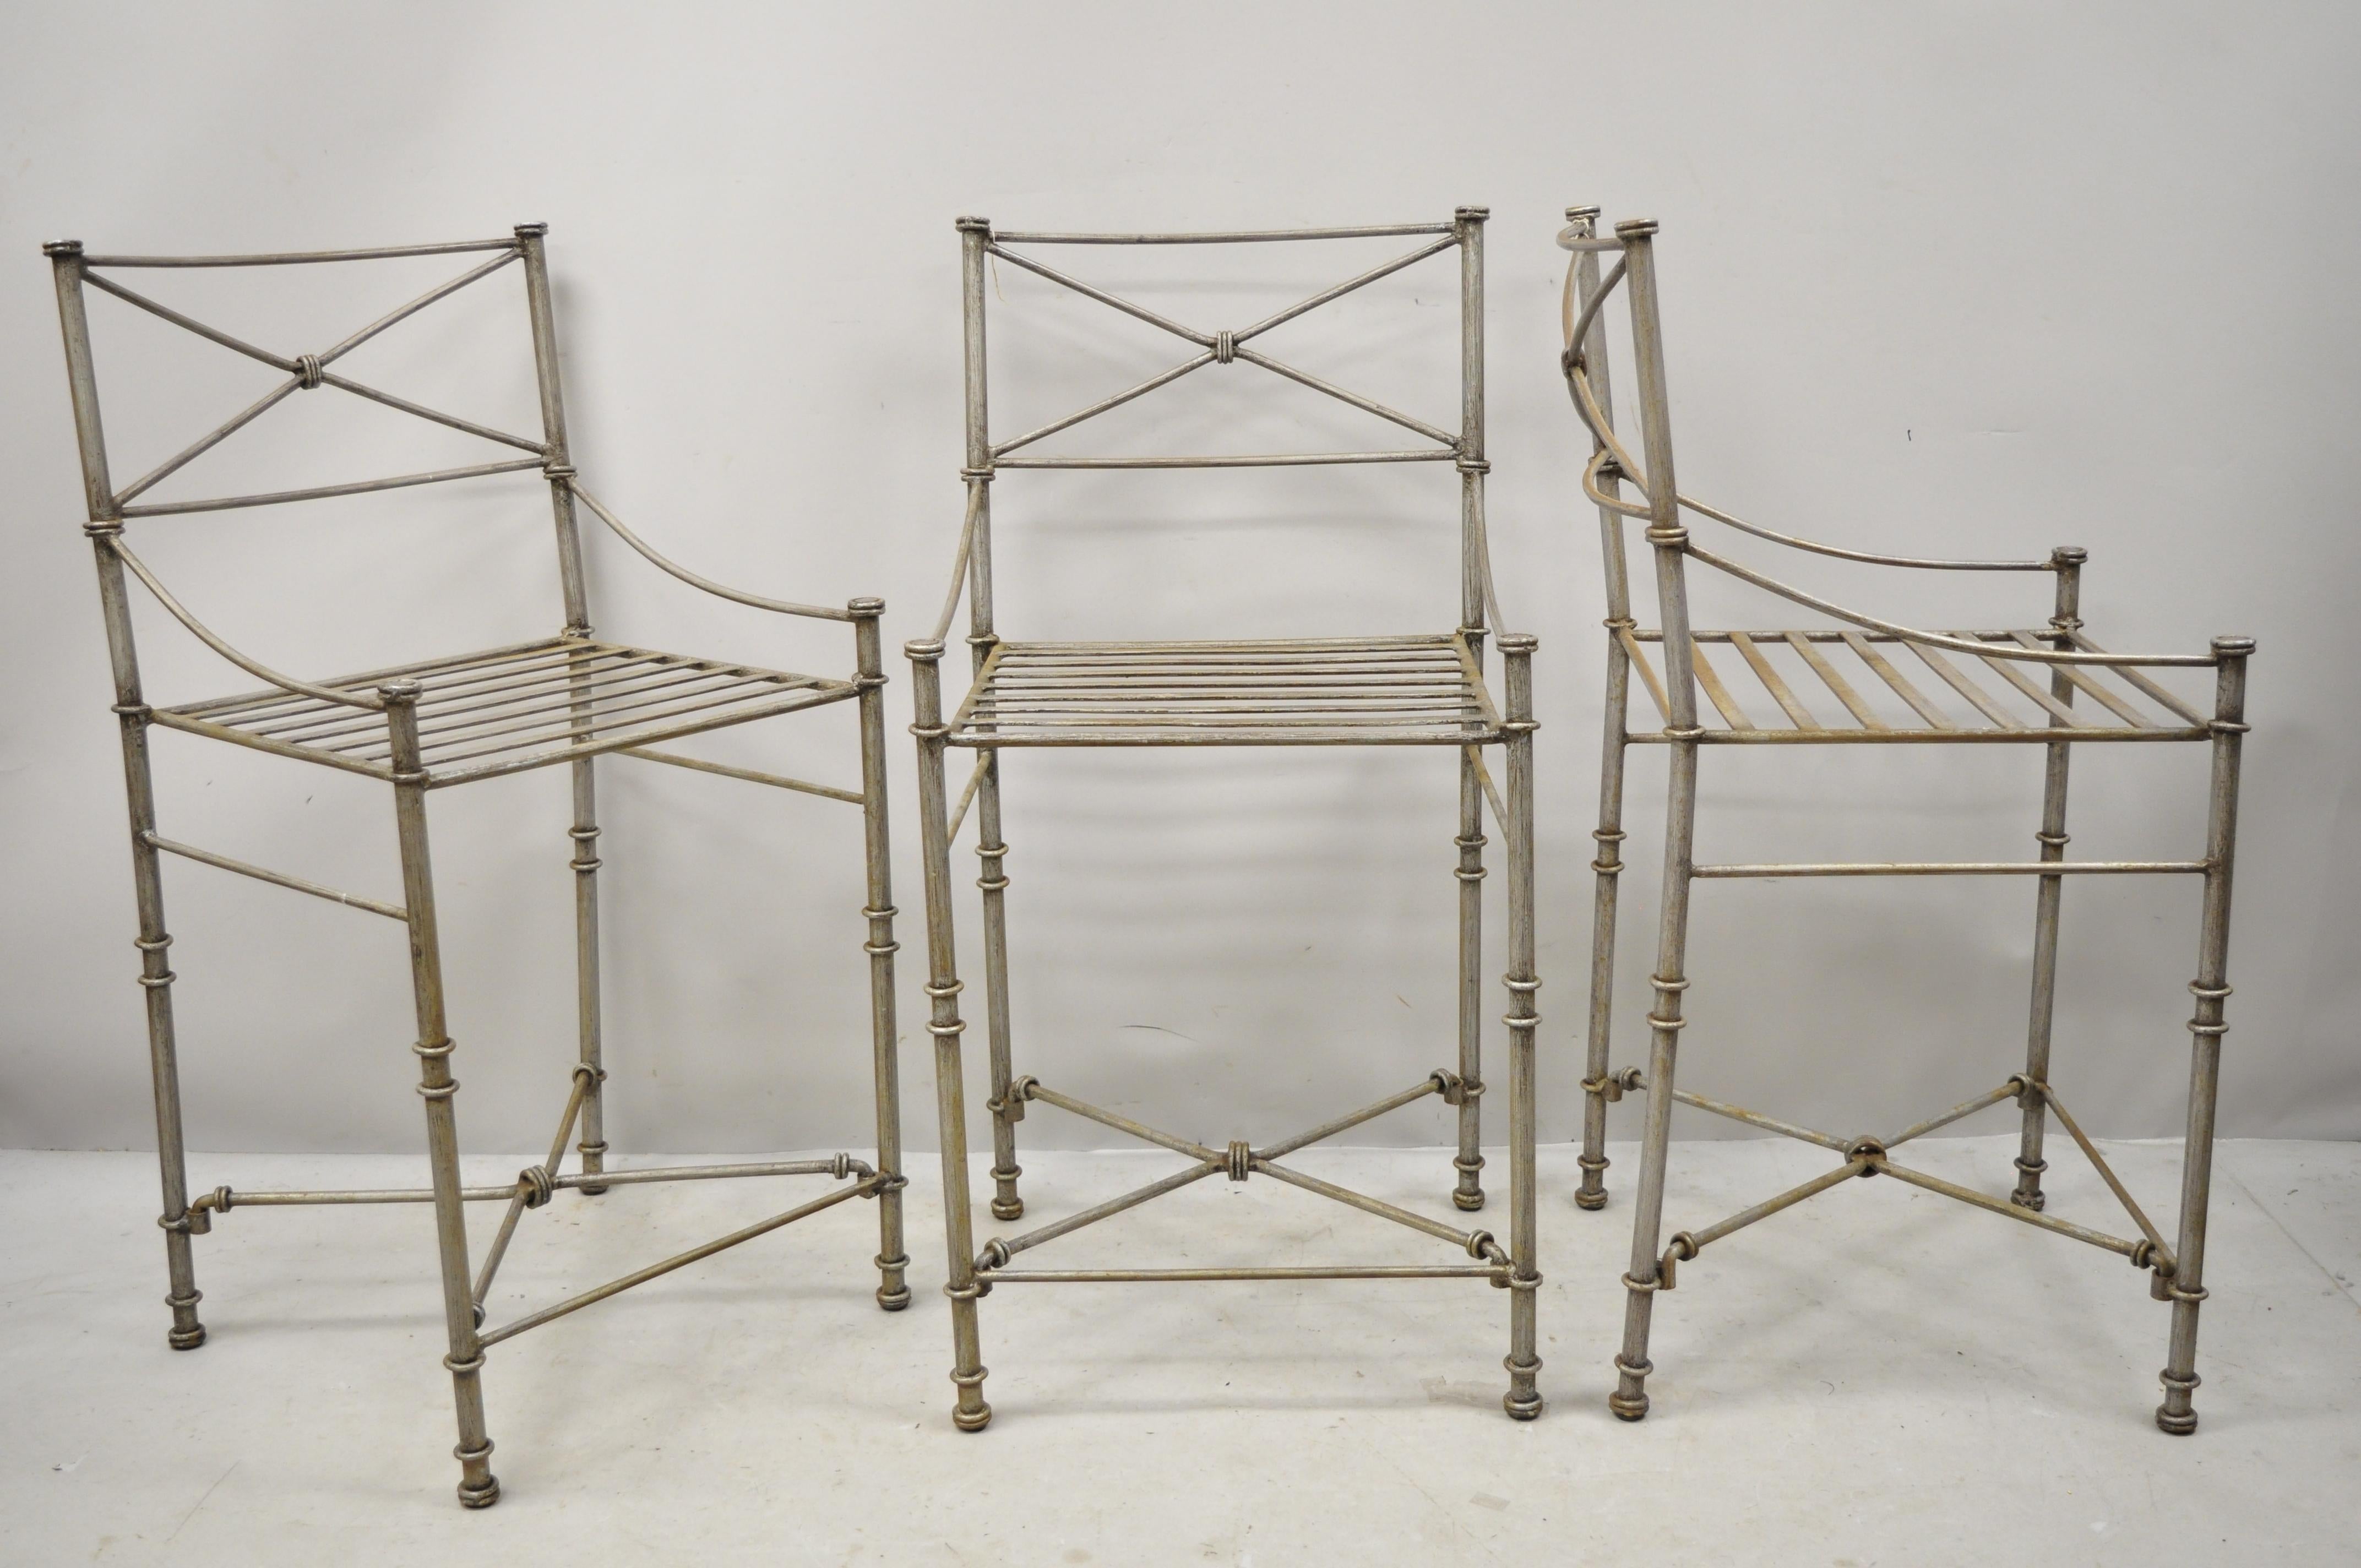 Late 20th century pier 1 Medici Pewter wrought iron counter bar stools - set of 3. Item features wrought iron construction, quality craftsmanship, great style and form, circa late 20th century. Measurements: 39